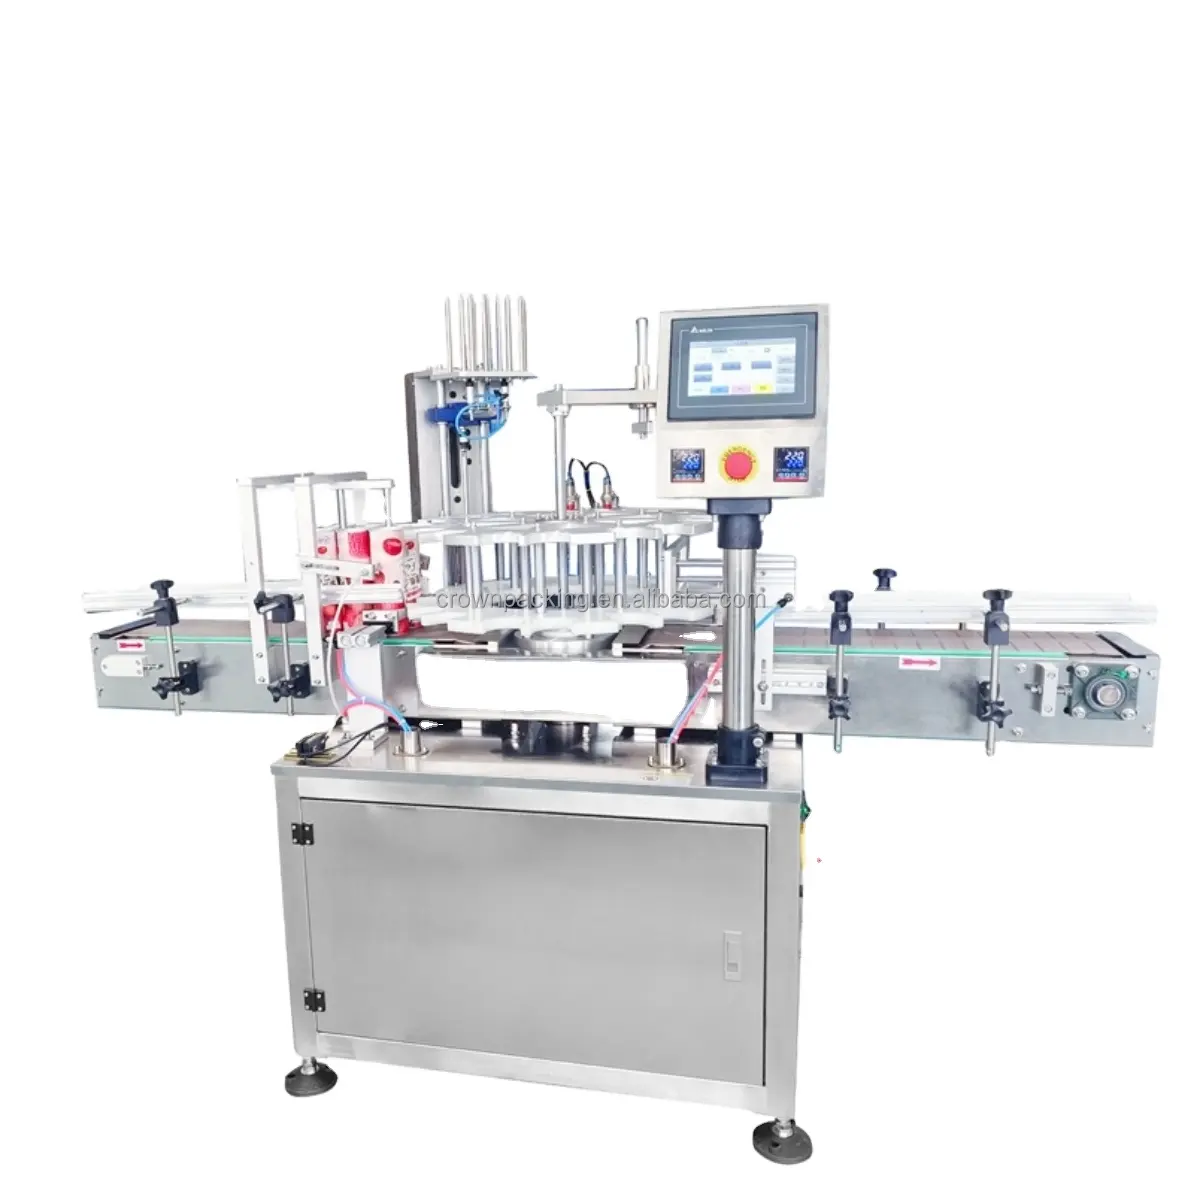 Puffing Snack Food Machine potatoes Chips Packing Barrel Equipment Rotary Cup Sealing Machine Automatic Snacks Cup Sealing